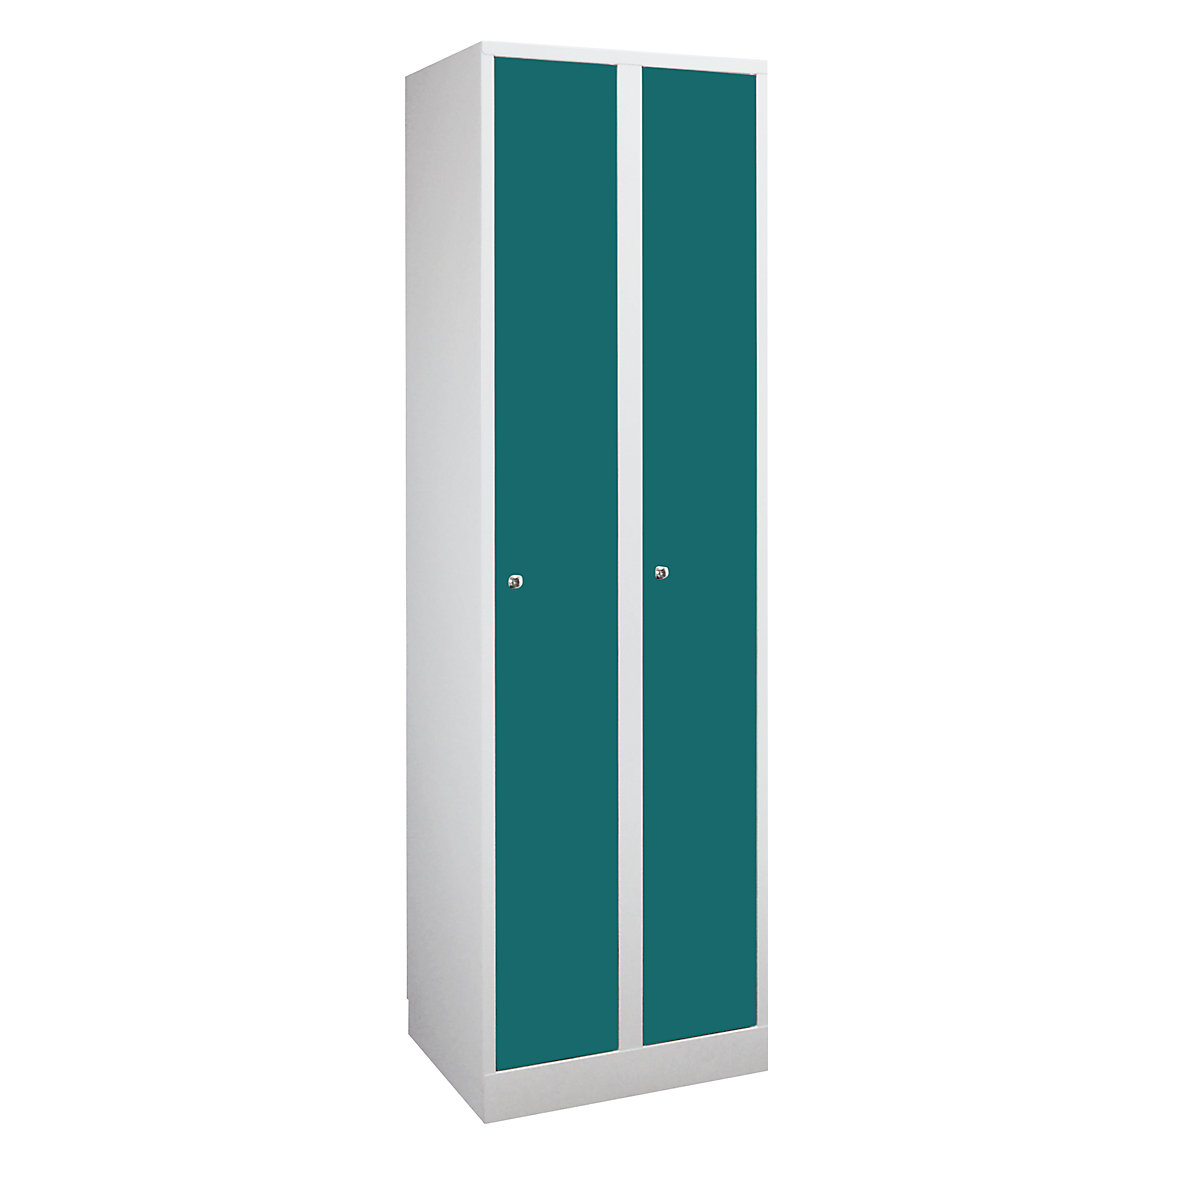 Wardrobe in practical sizes – Wolf, 2 compartments, compartment width 400 mm, light grey / opal green-6